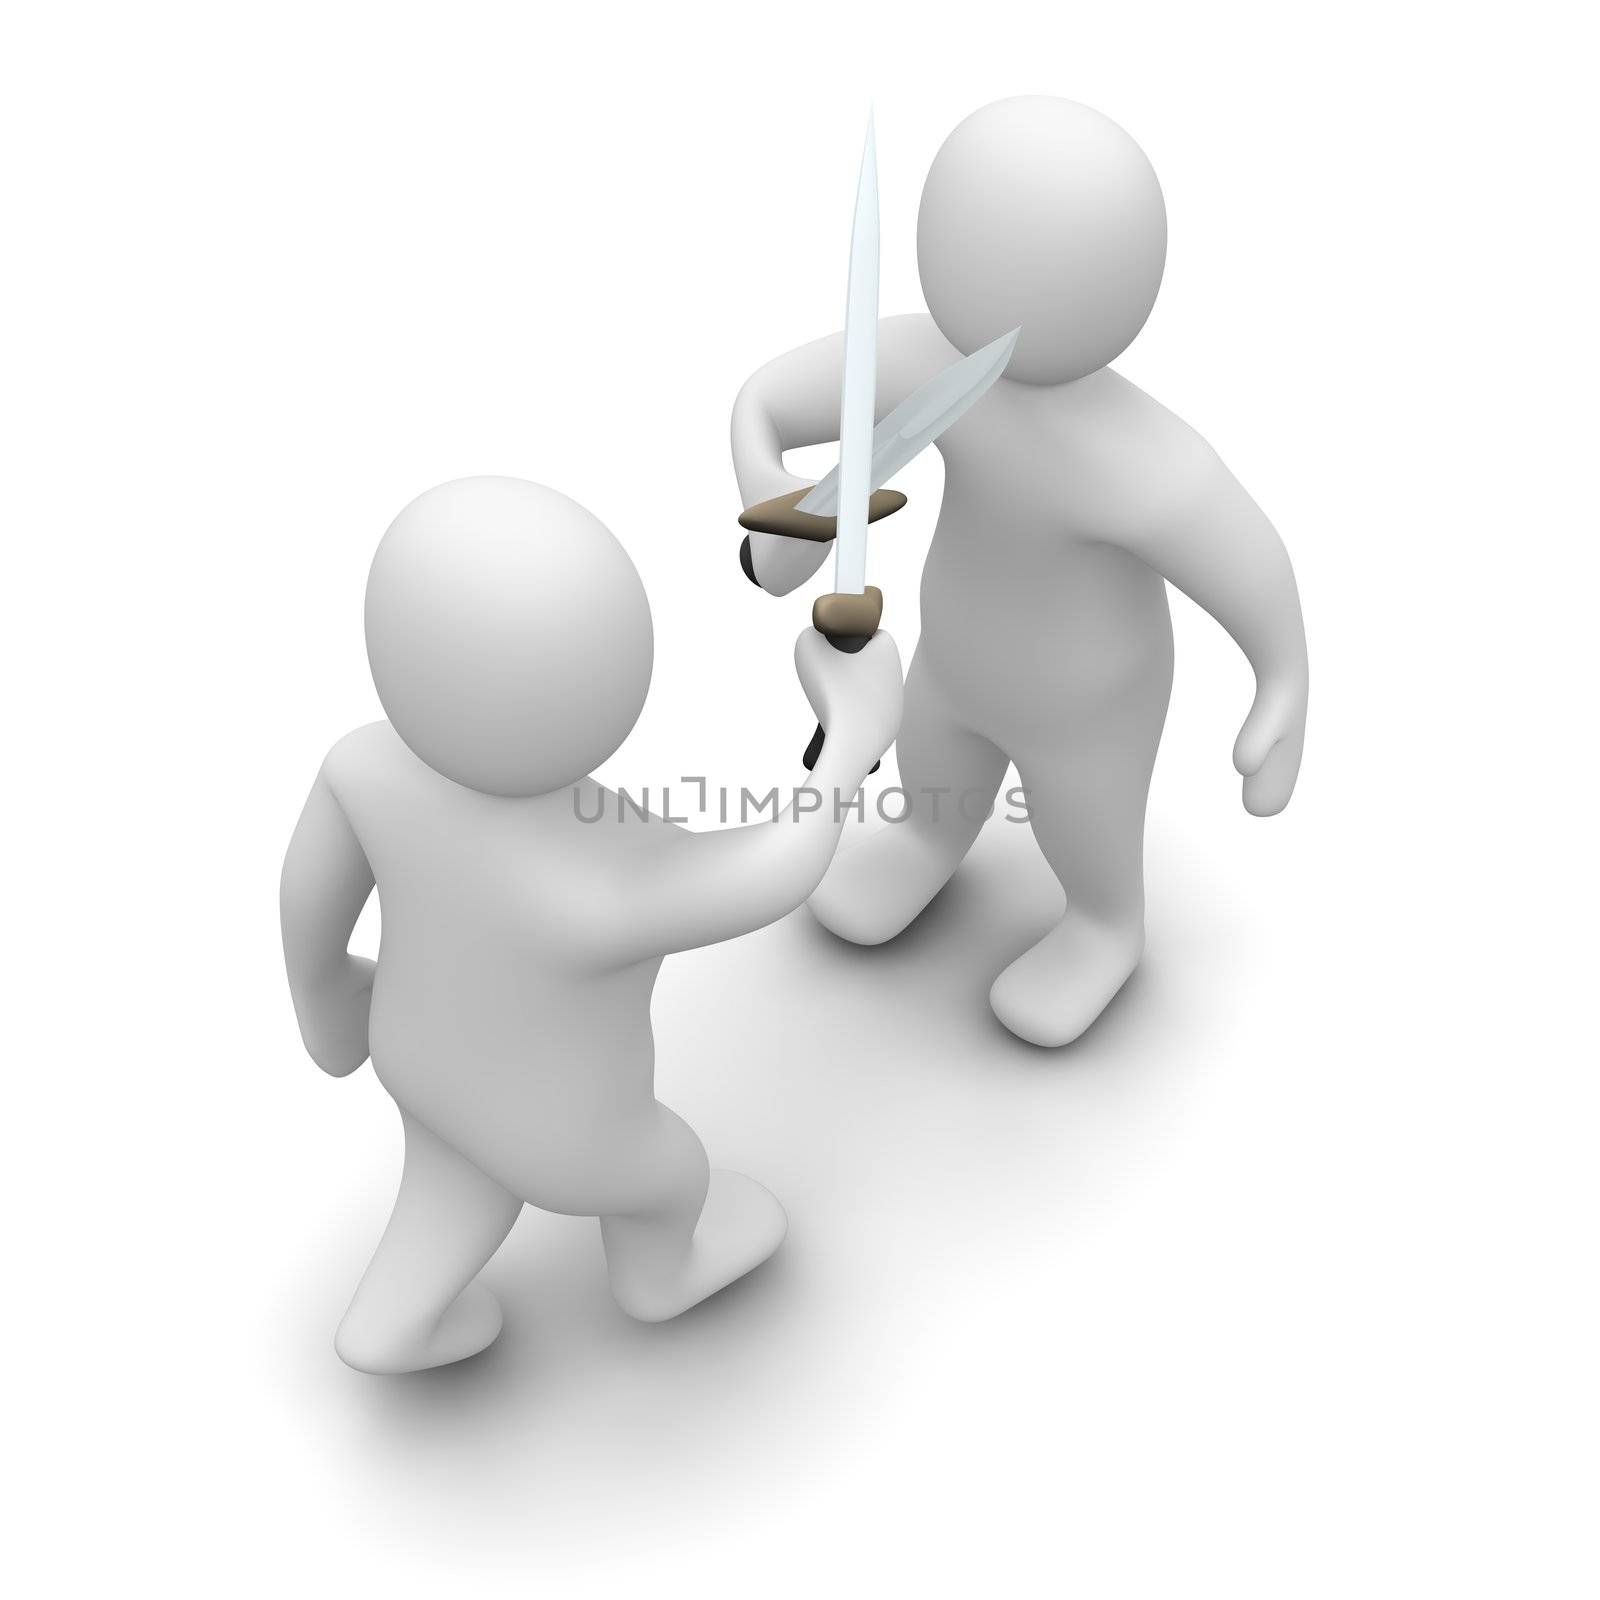 Fighting with swords. 3d rendered illustration isolated on white.